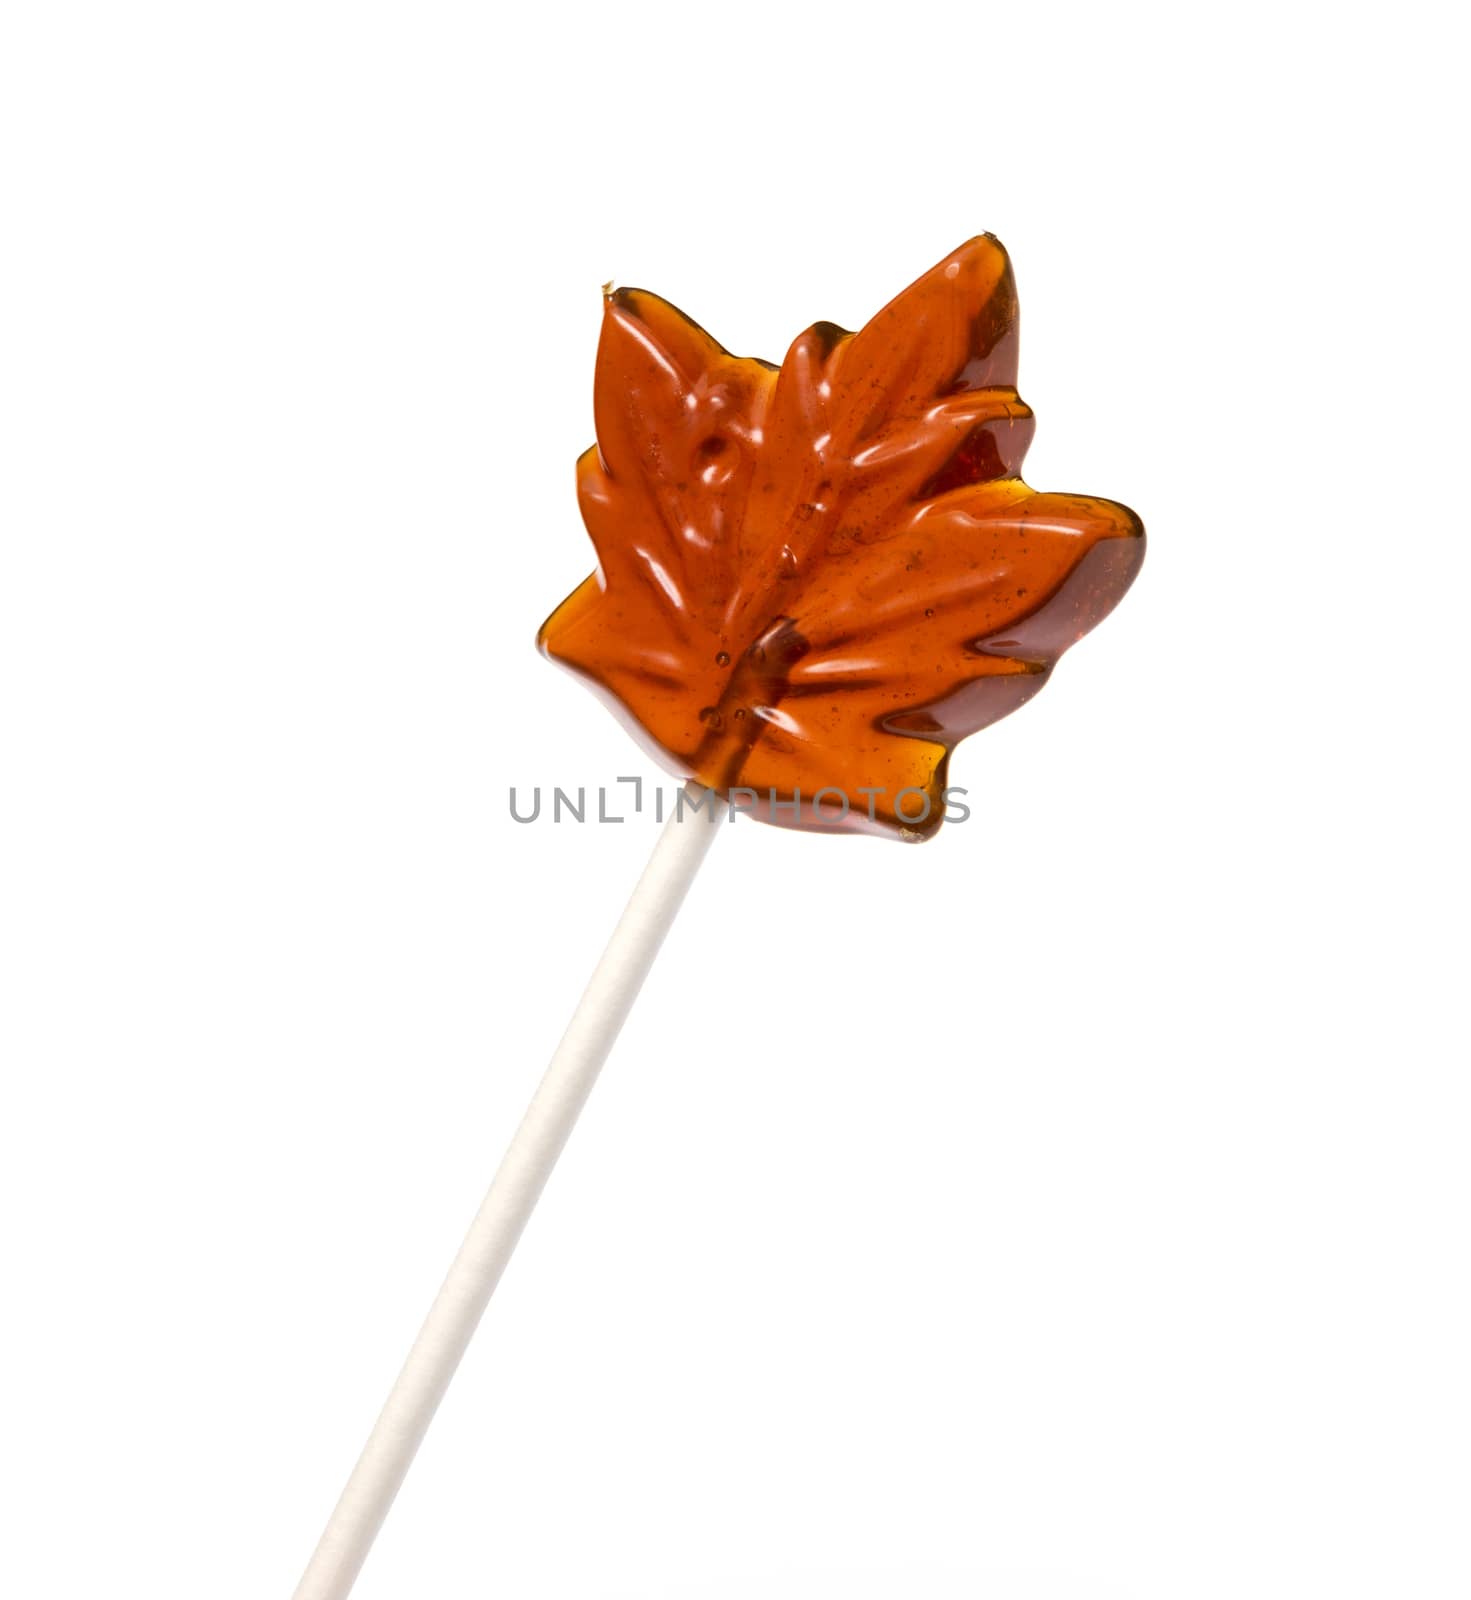 Delicious Maple Syrup Lollipop, on a white background by DNKSTUDIO